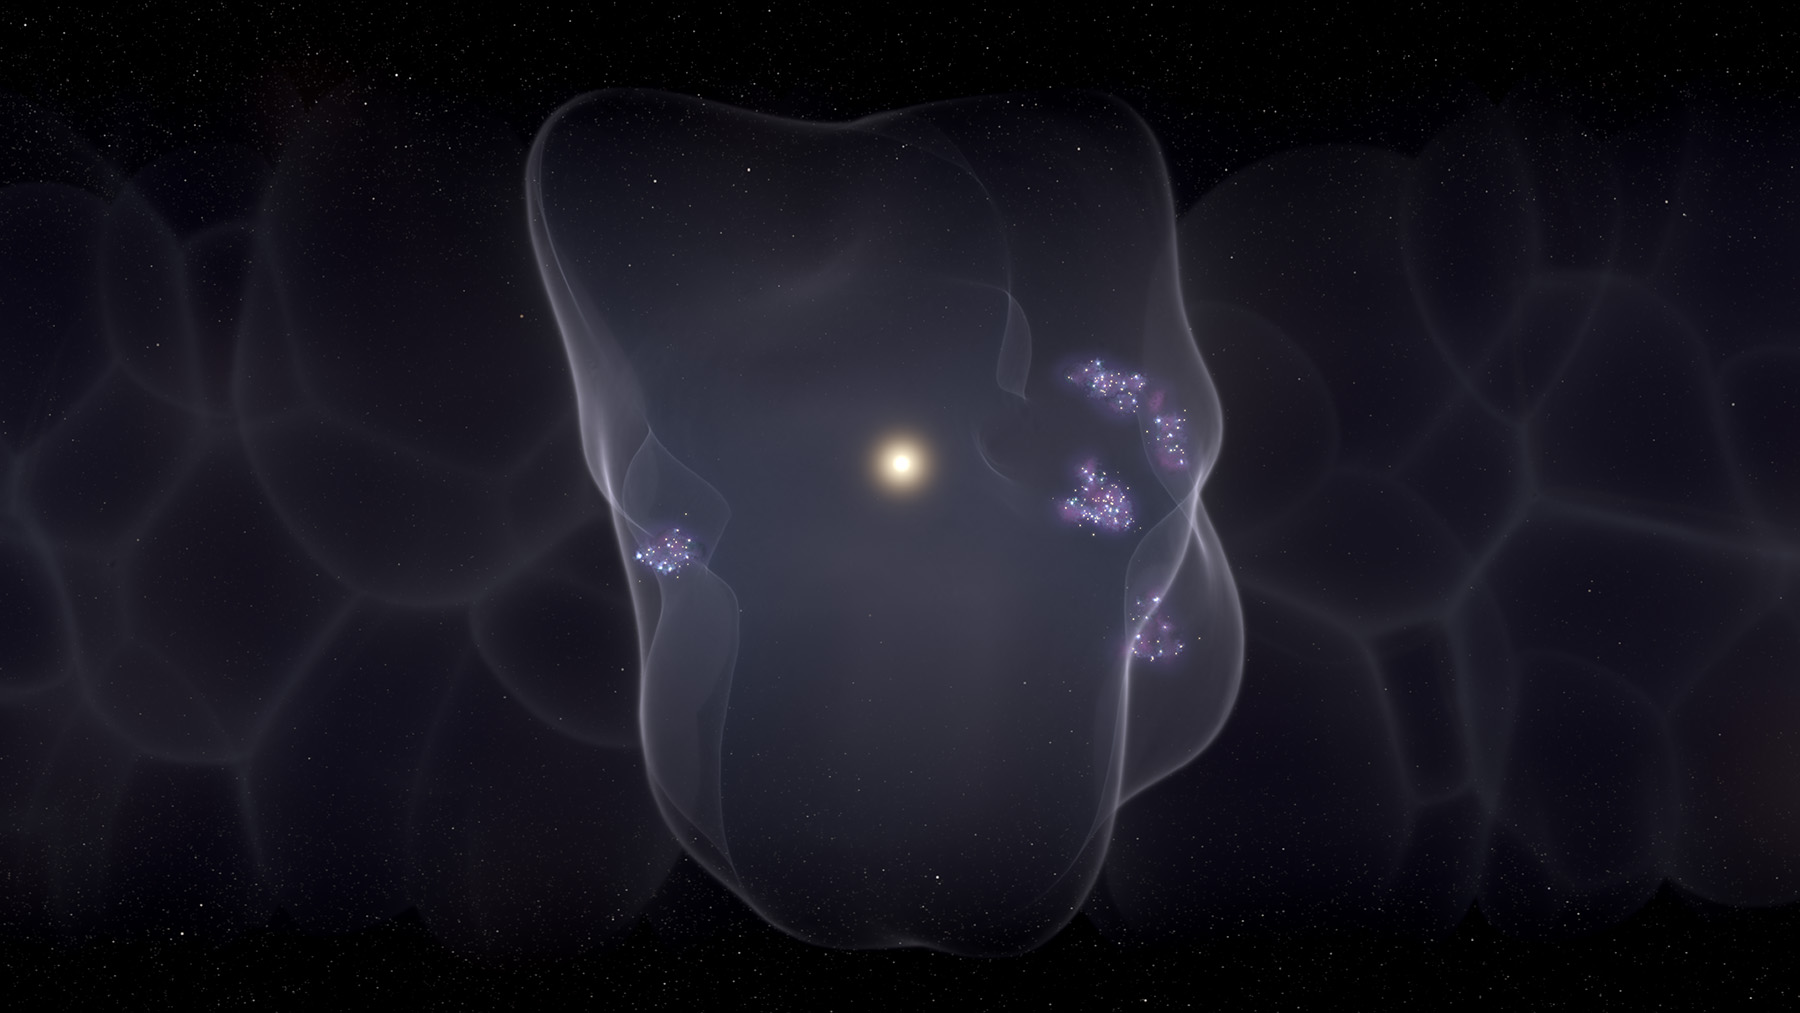 Artist's illustration of the Local Bubble with star formation occurring on the bubble's surface. Scientists have now shown how a chain of events beginning 14 million years ago with a set of powerful supernovae led to the creation of the vast bubble, responsible for the formation of all young stars within 500 light years of the Sun and Earth. Credit: